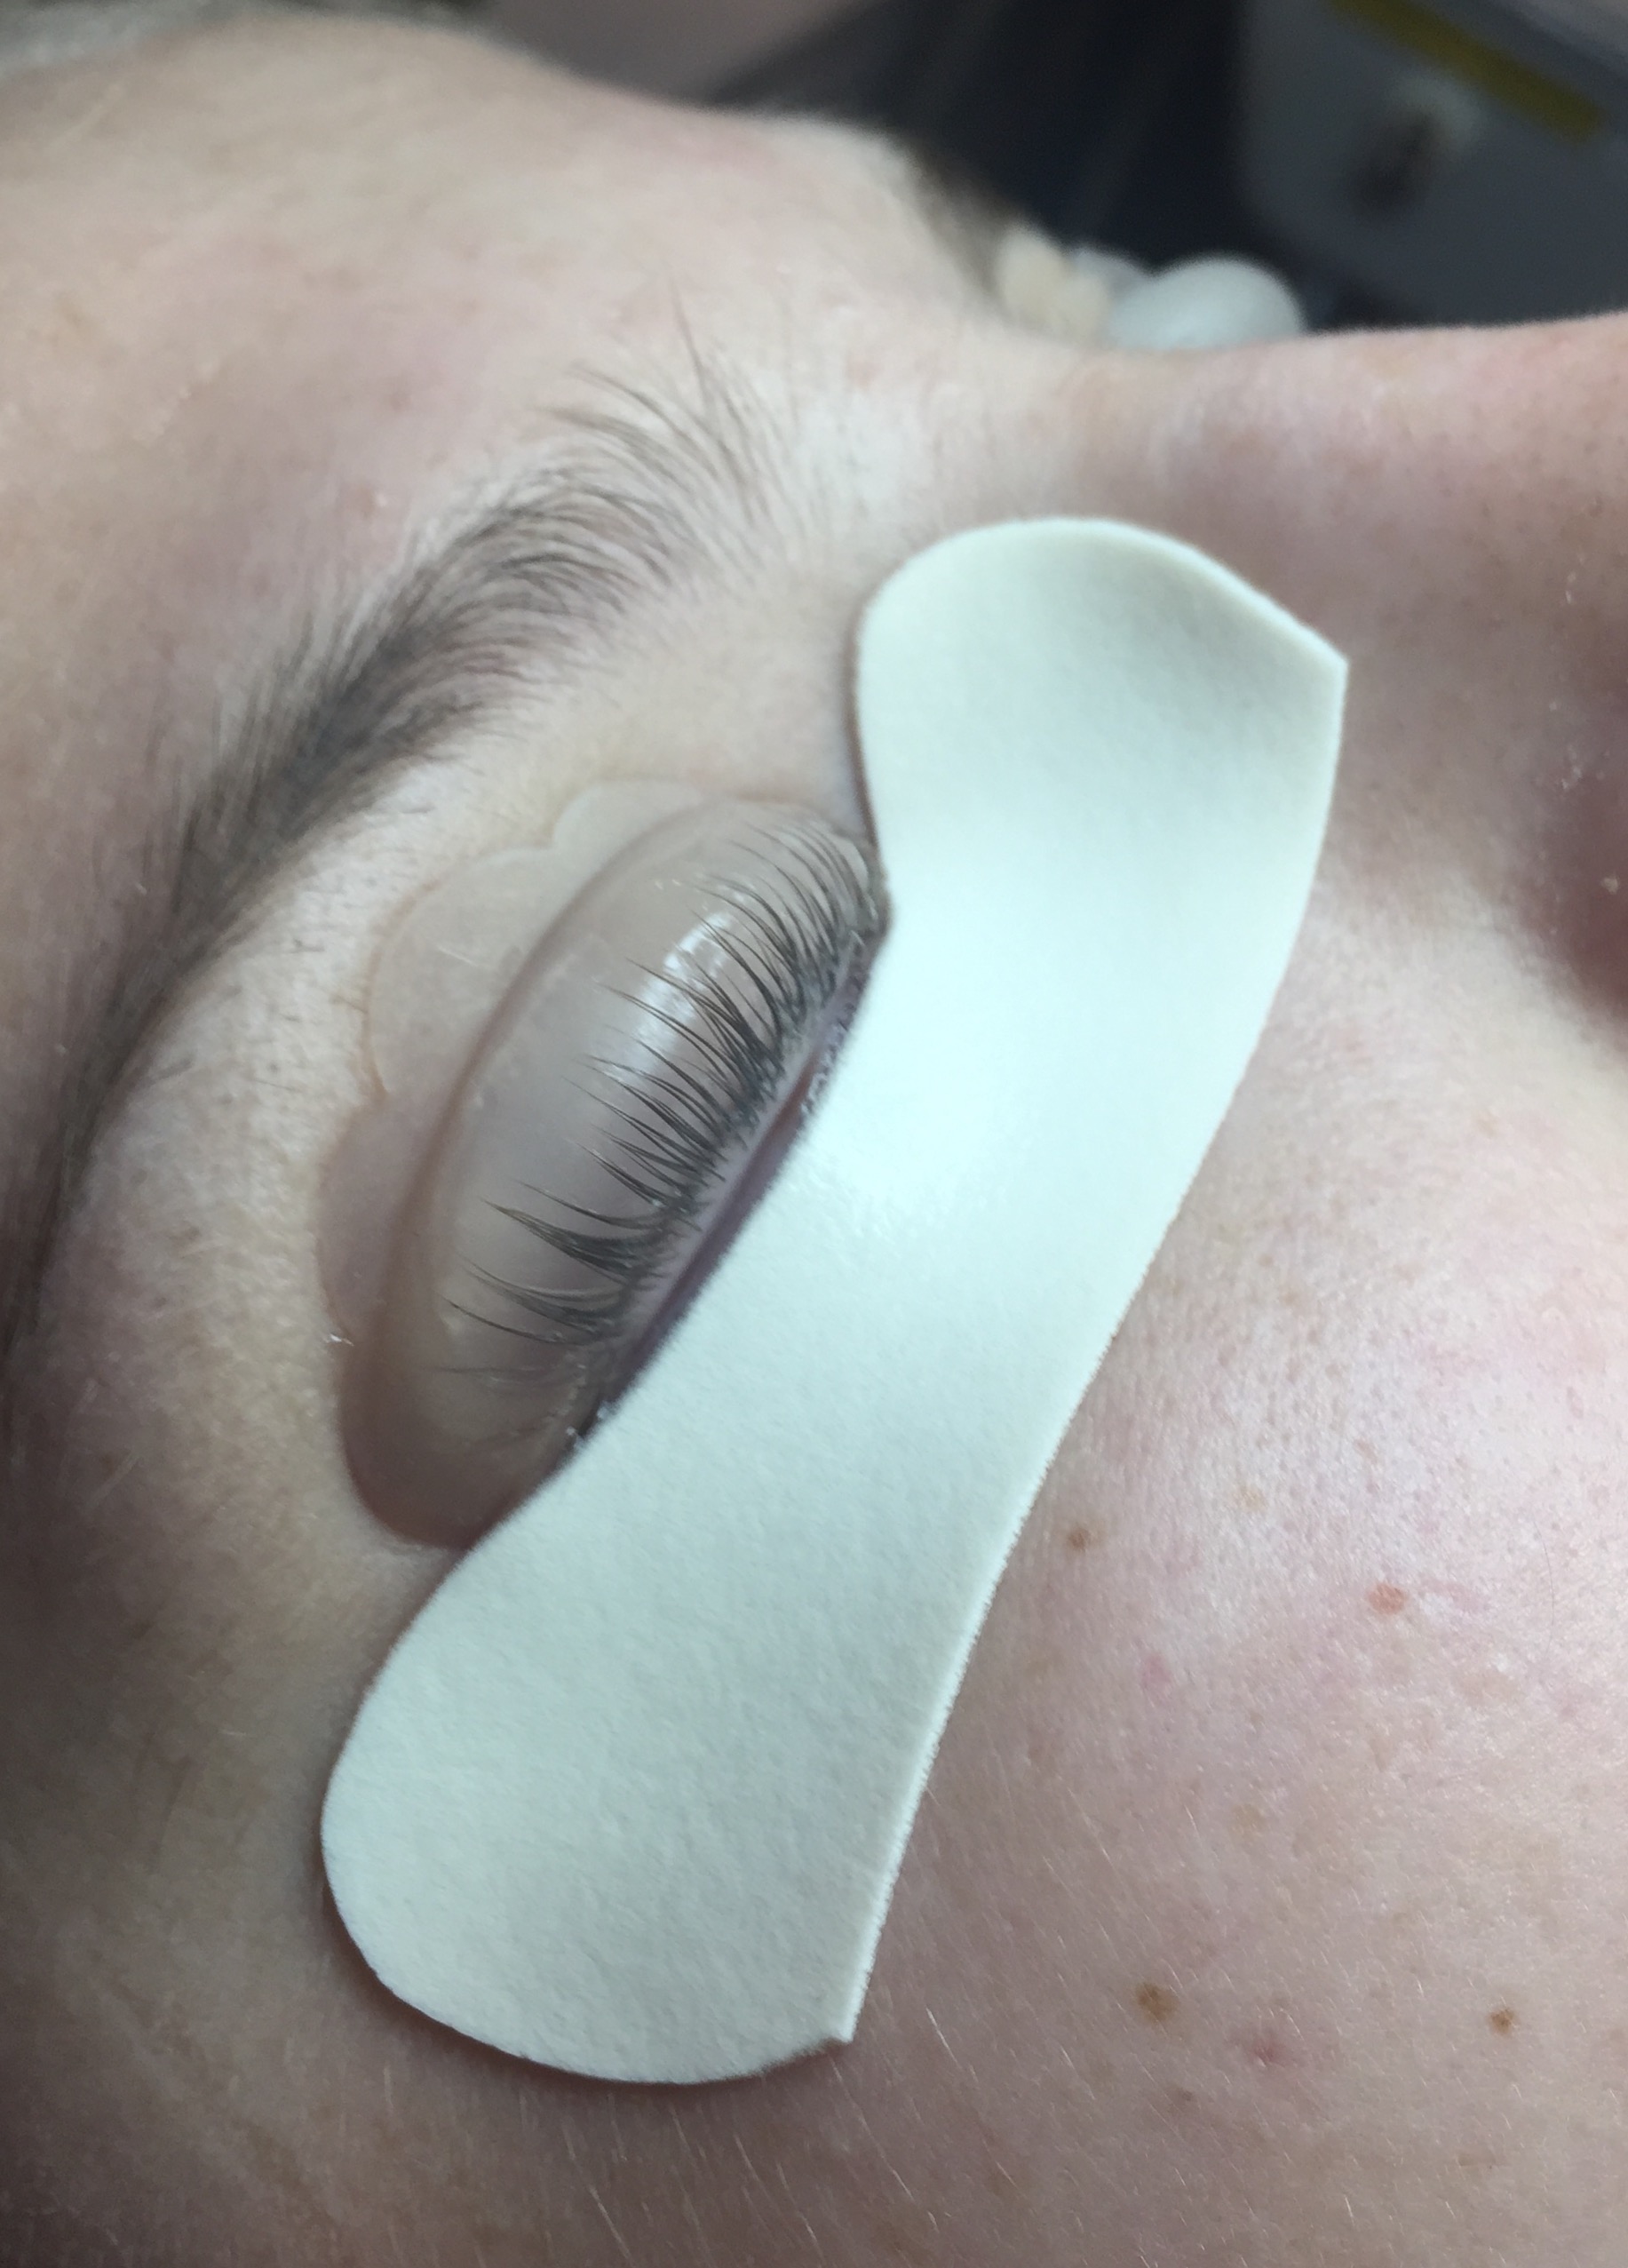 The lower lashes are protected by the foam tape and the upper lashes have been adhered to the silicon shield. After processing, this is the shape they will take!